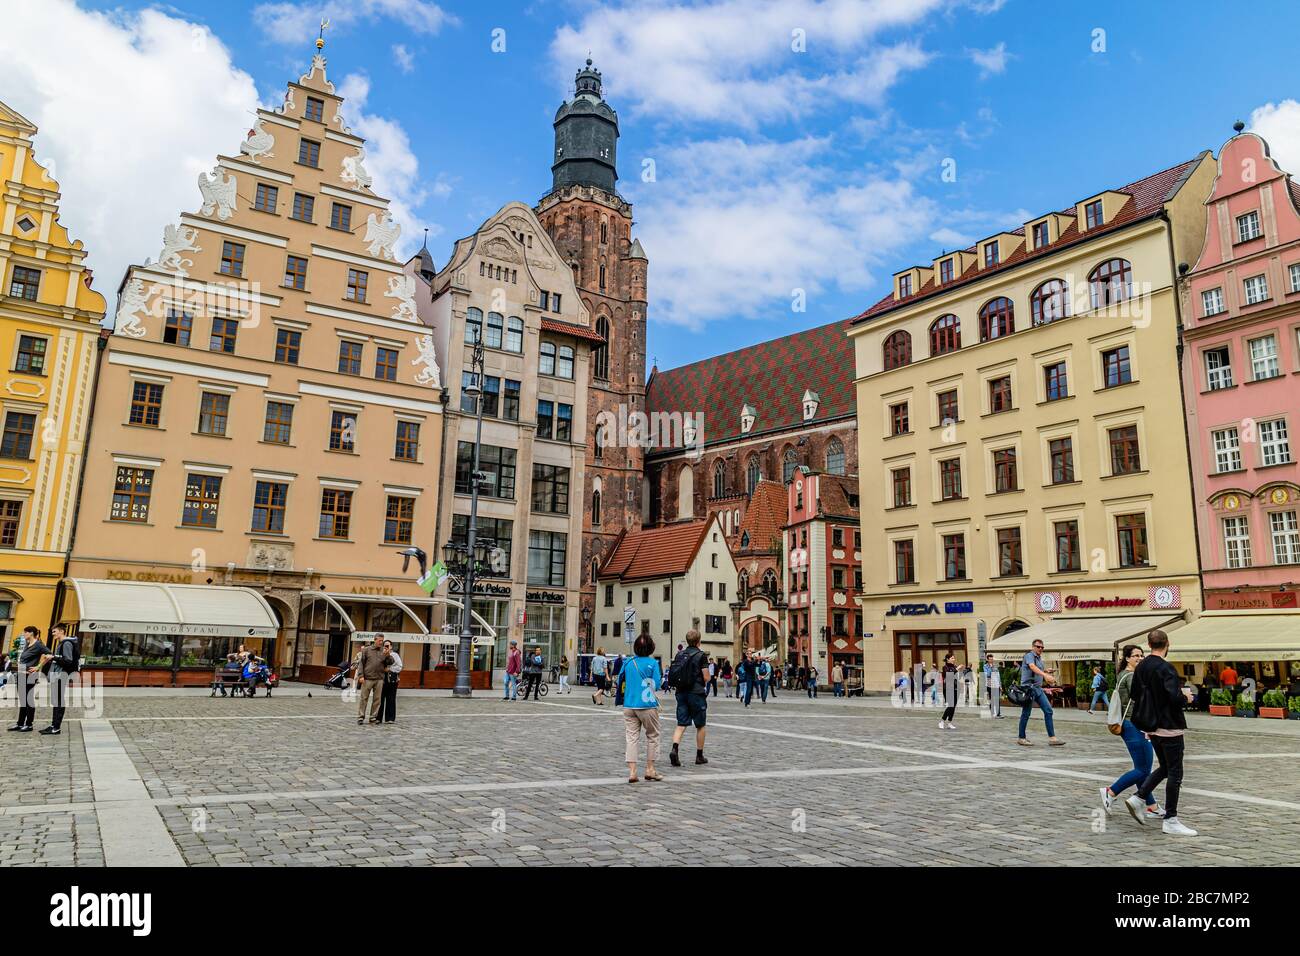 People in Wroclaw's main square, the rynek, with landmarks St Elizabeth's Church and the Hansel & Gretal houses behind. Wroclaw, Poland. July 2017. Stock Photo